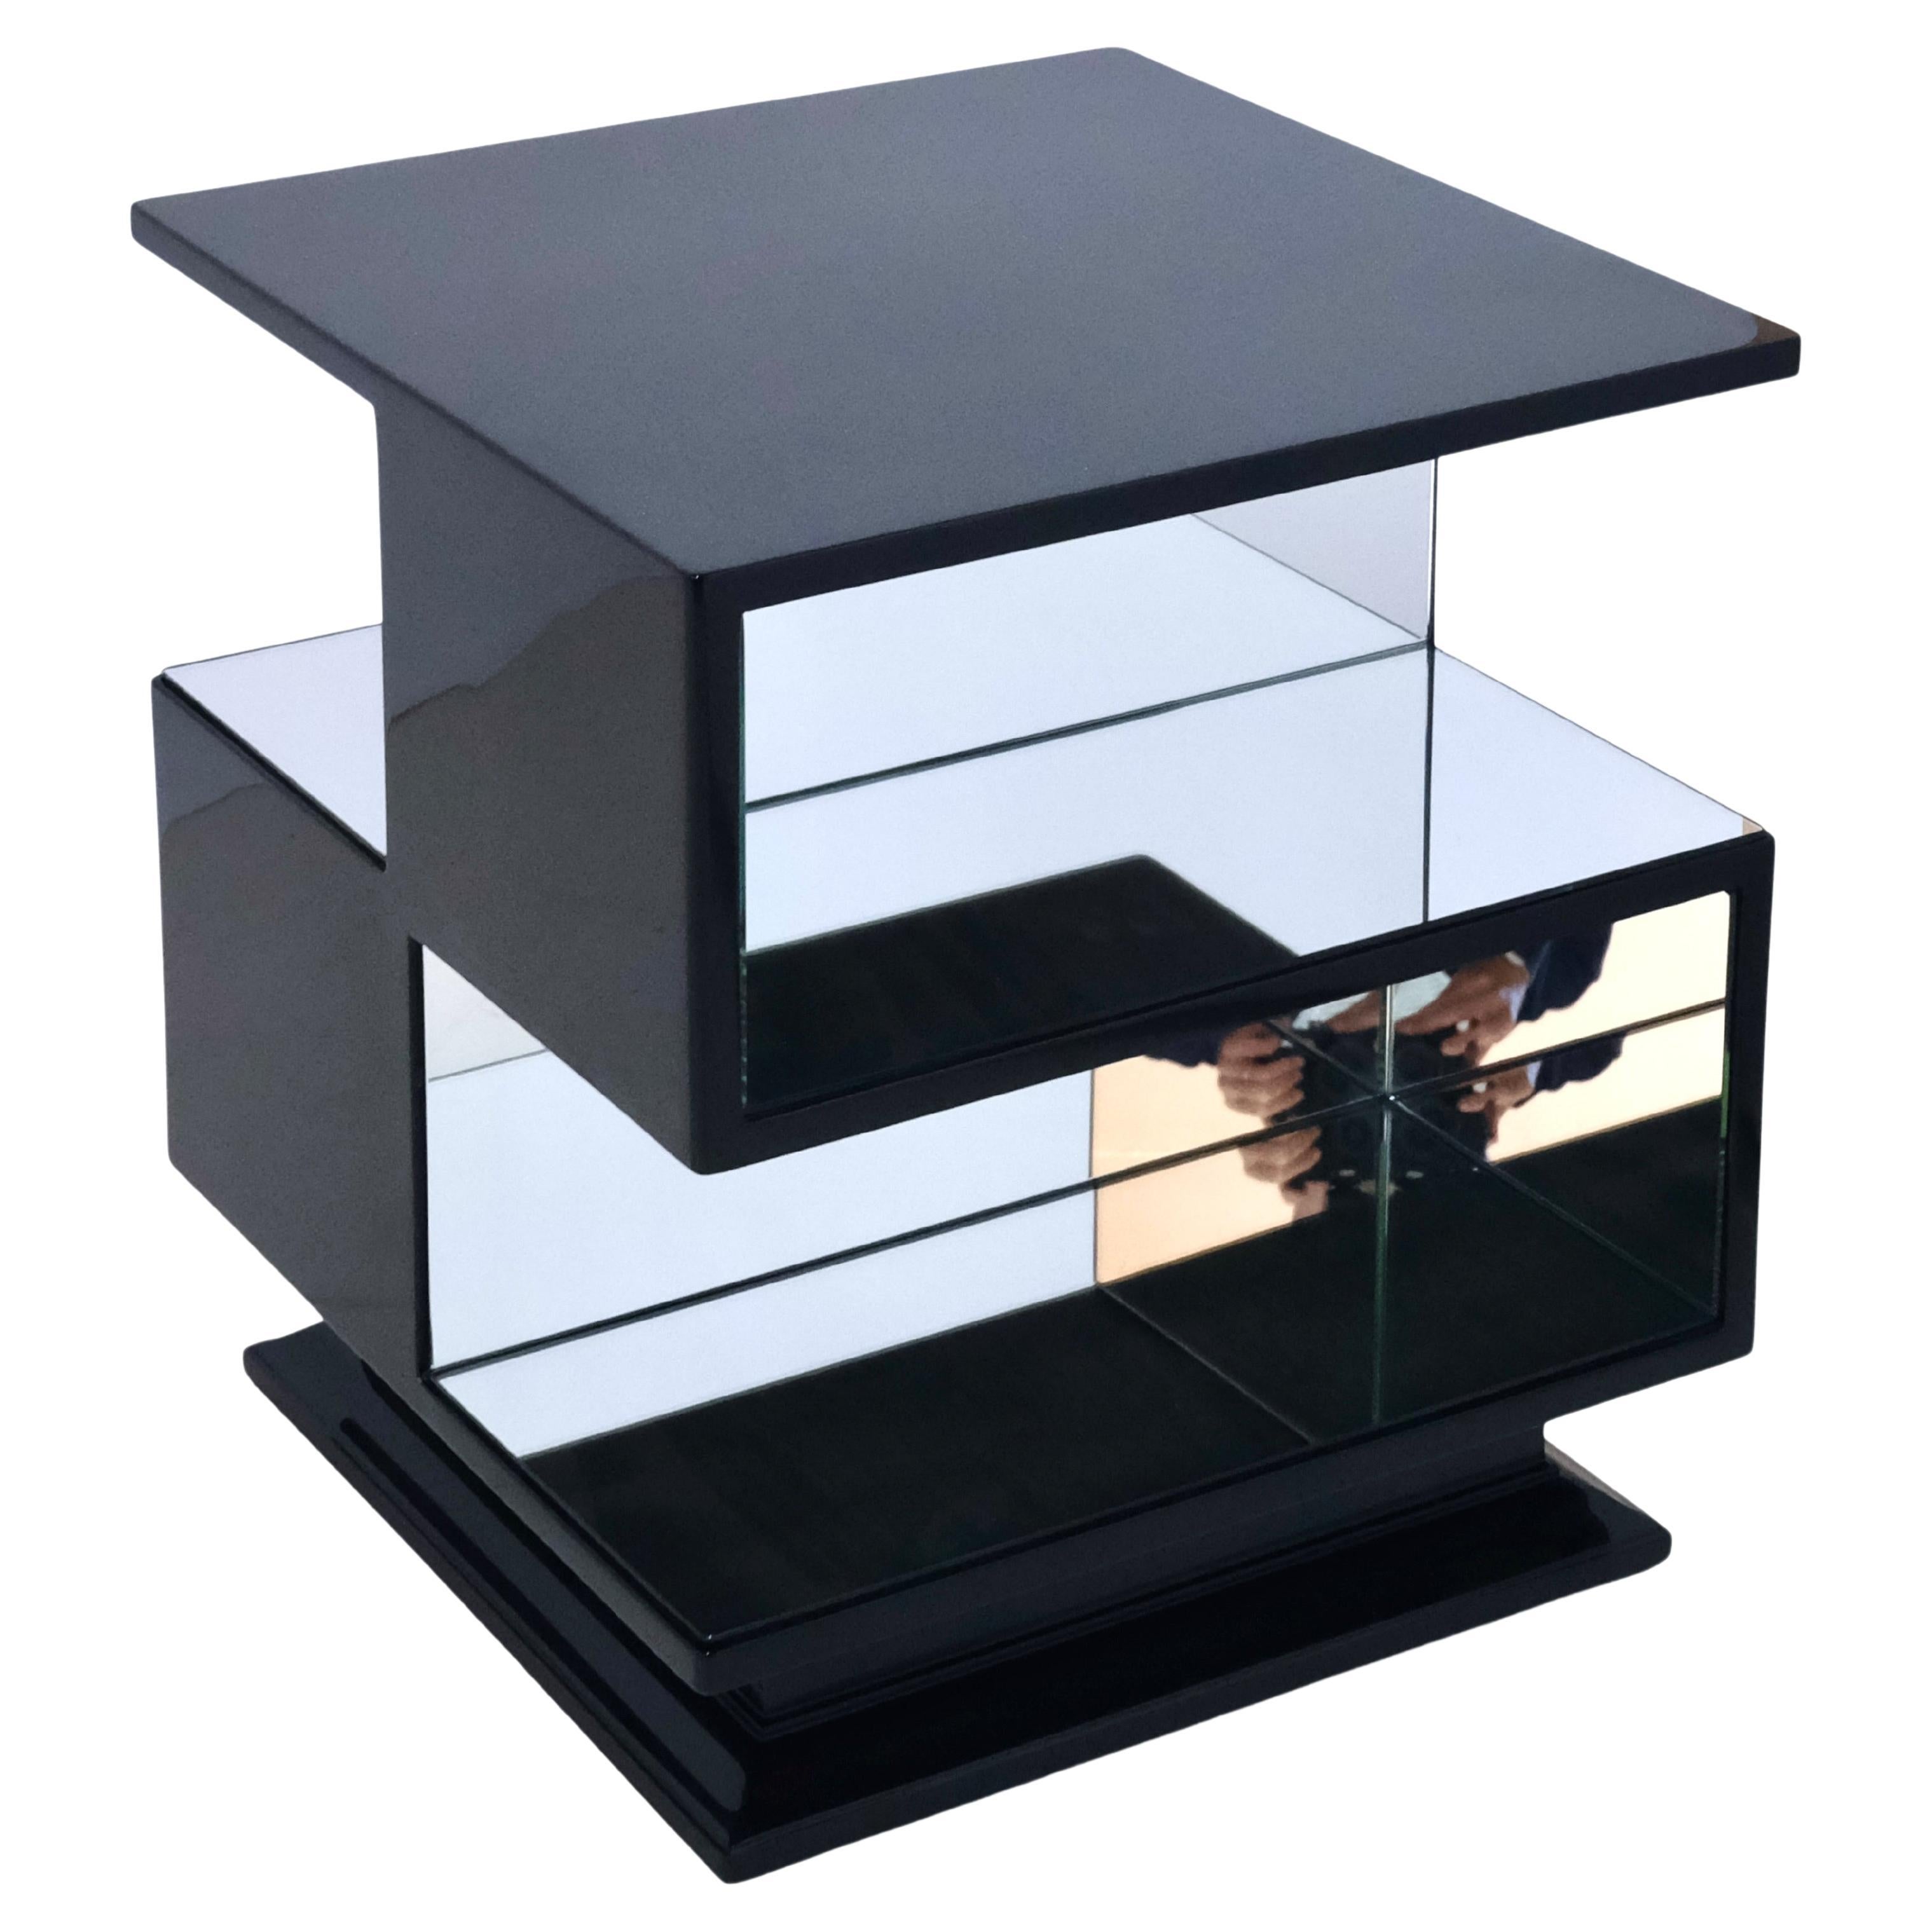 Cubist Art Deco Side Table in Black Lacquer with Mirrored Surfaces  For Sale